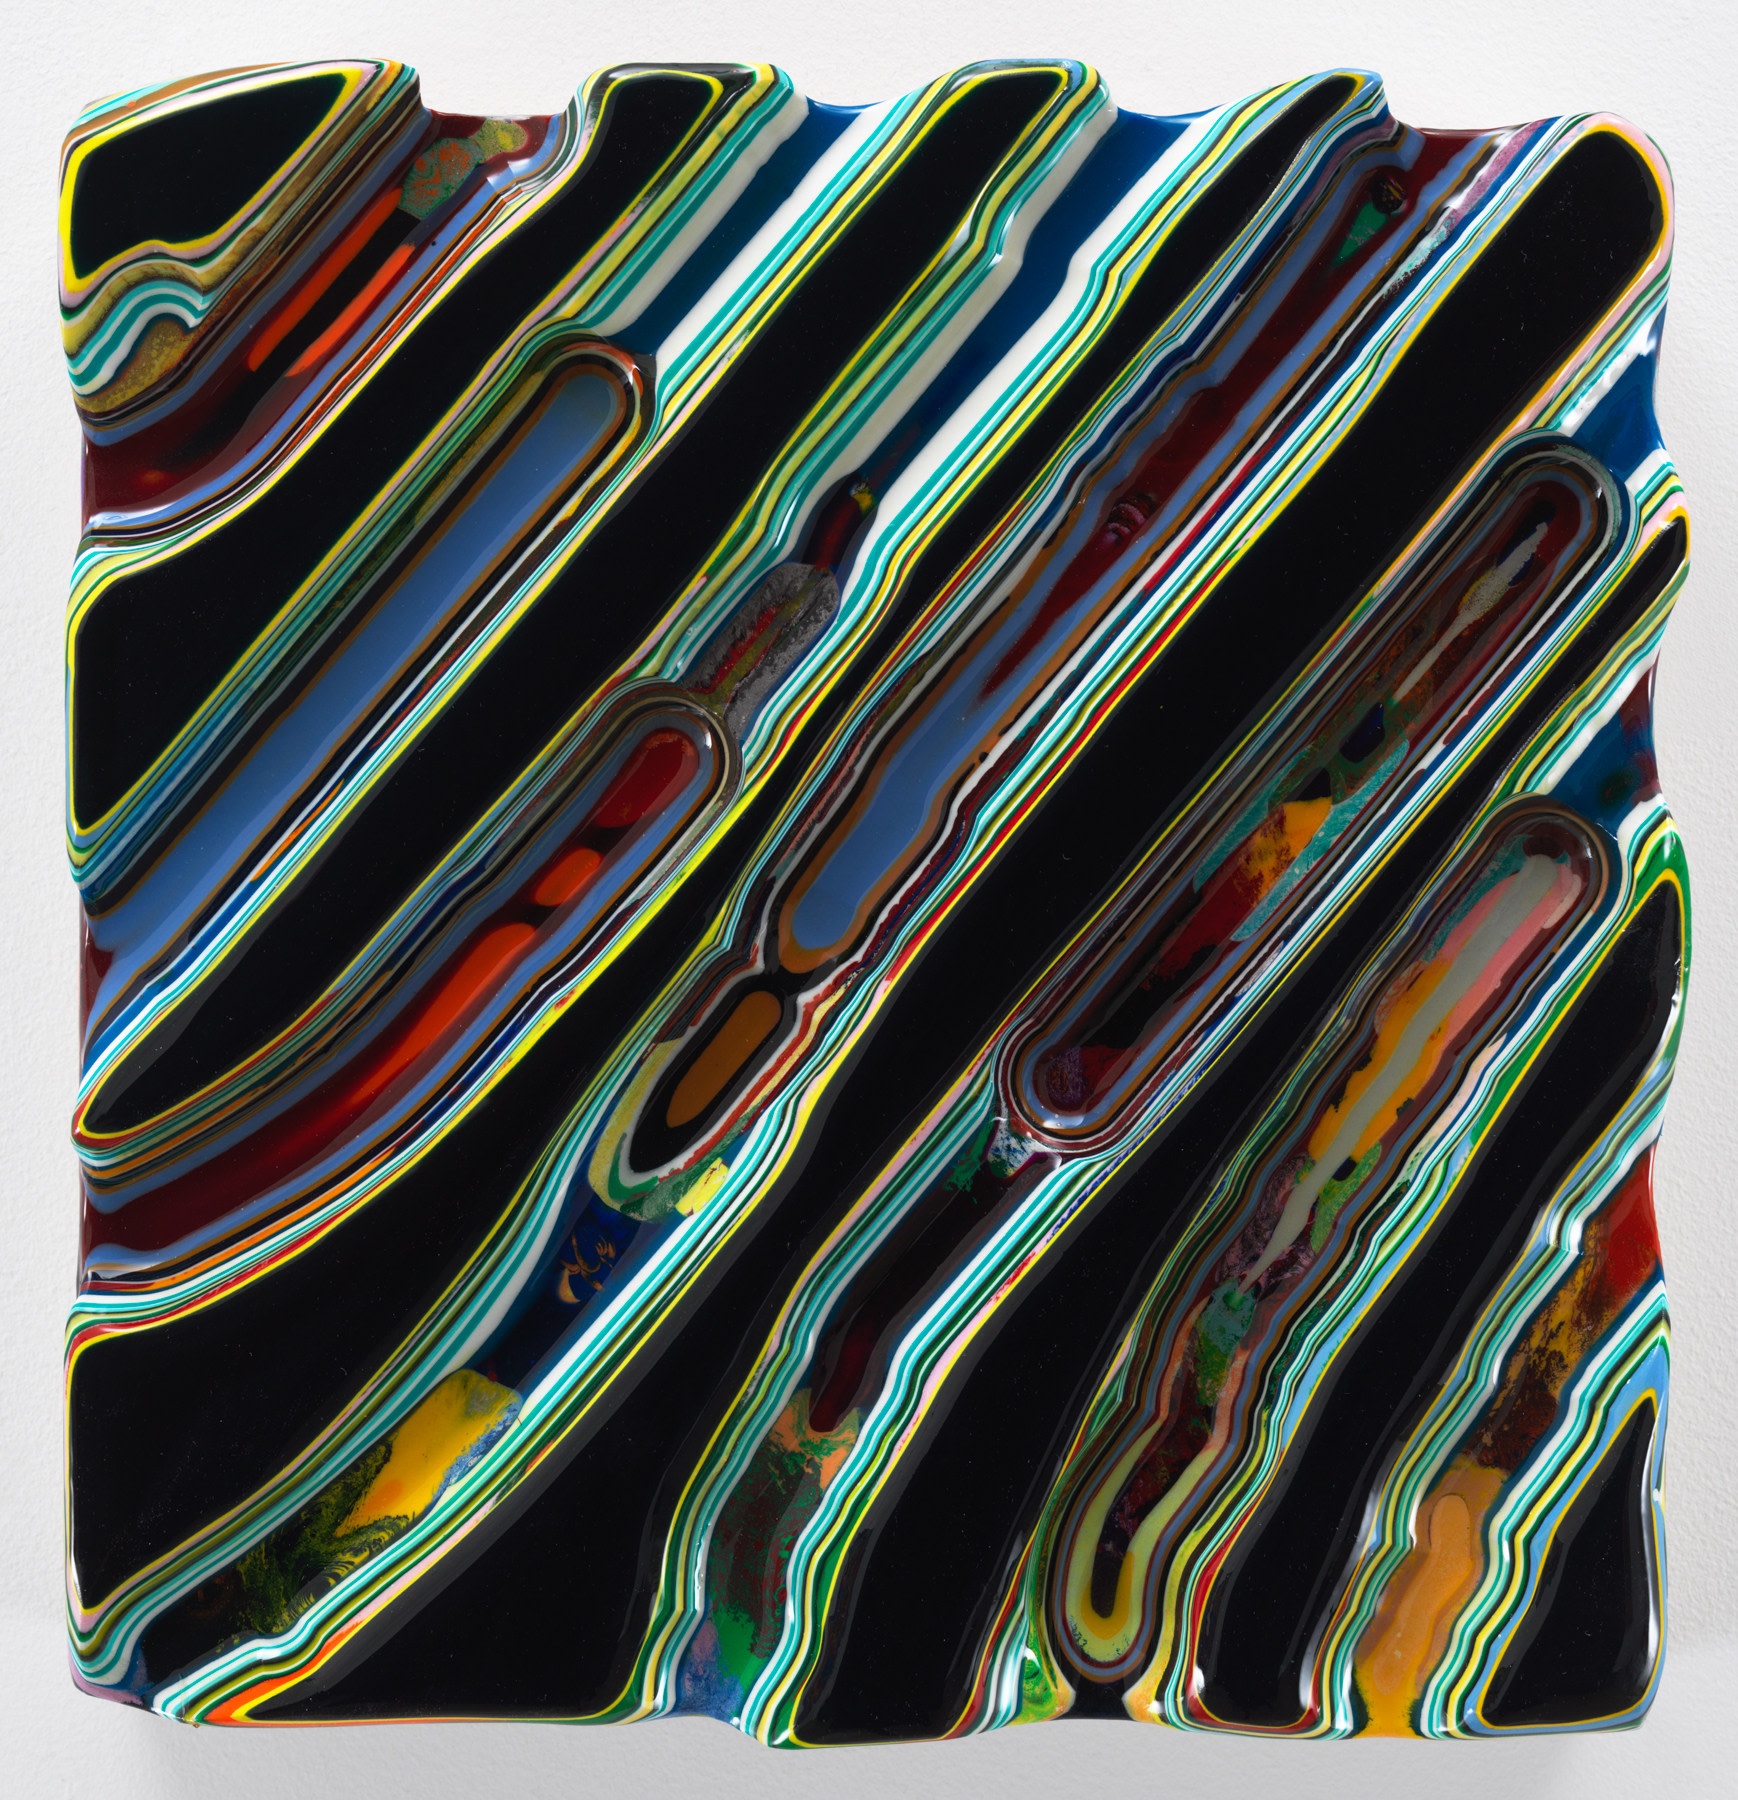 TEARSINTHETYPINGPOOL, 2016, Epoxy resin and pigments on wood, 14 x 14 inches, 35.6 x 35.6 cm, AMY#28438